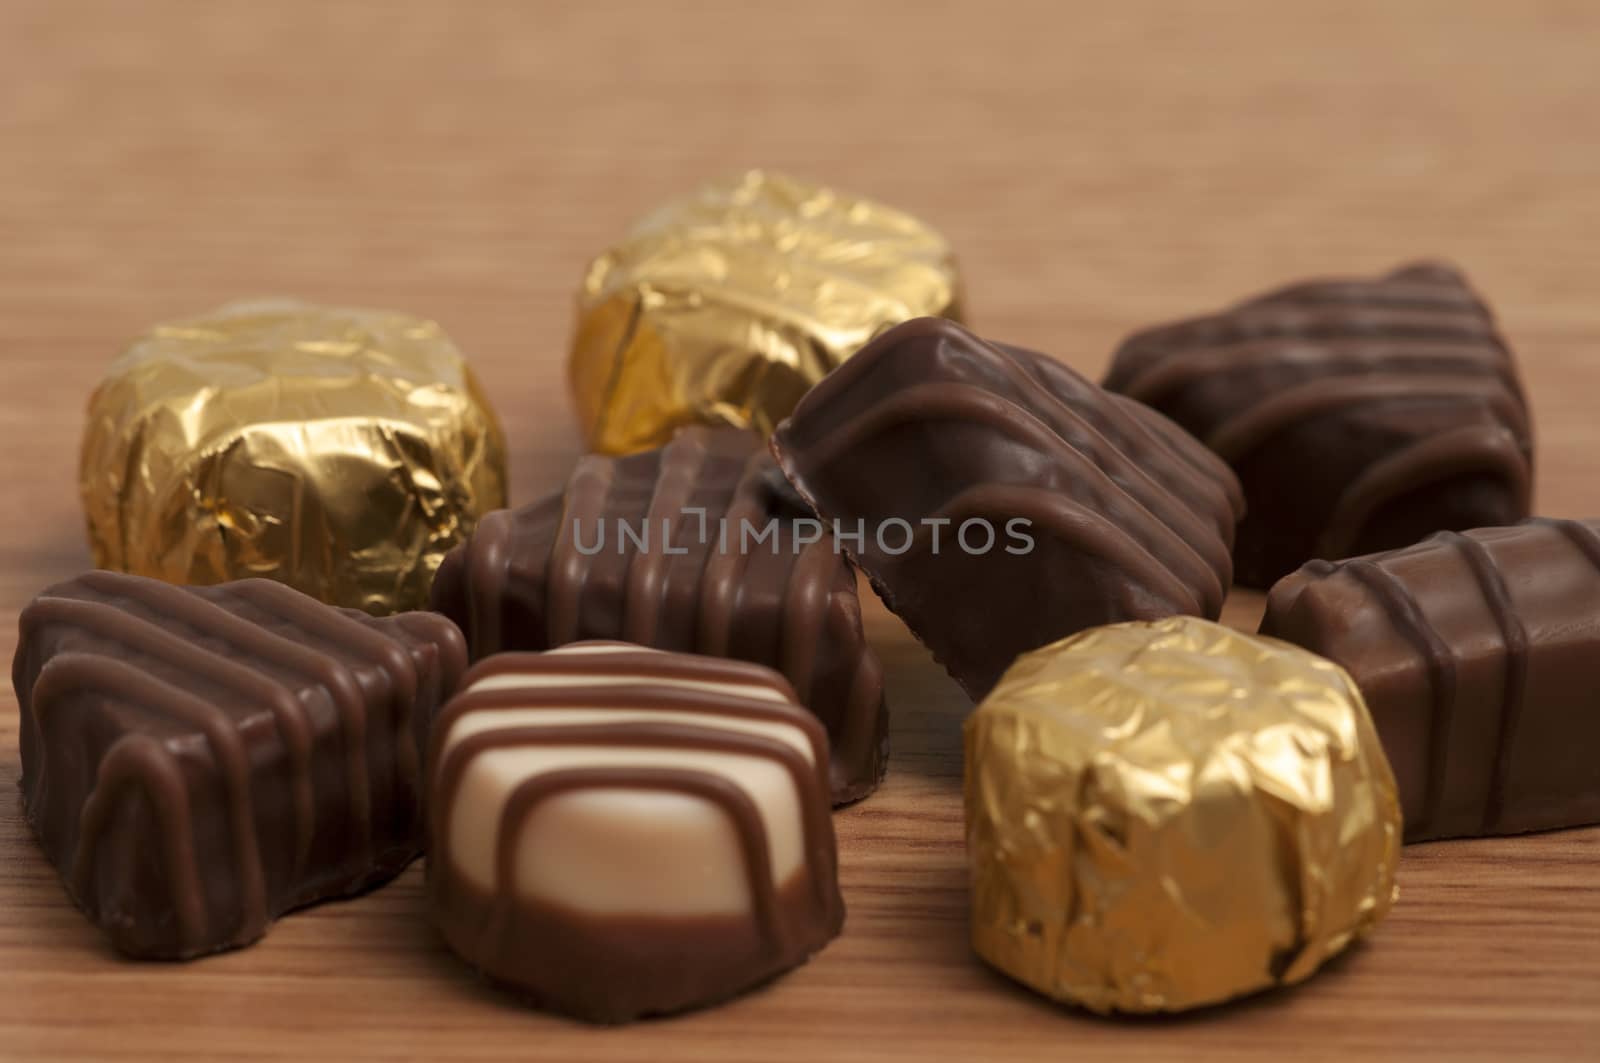 Small selection of chocolate on the table